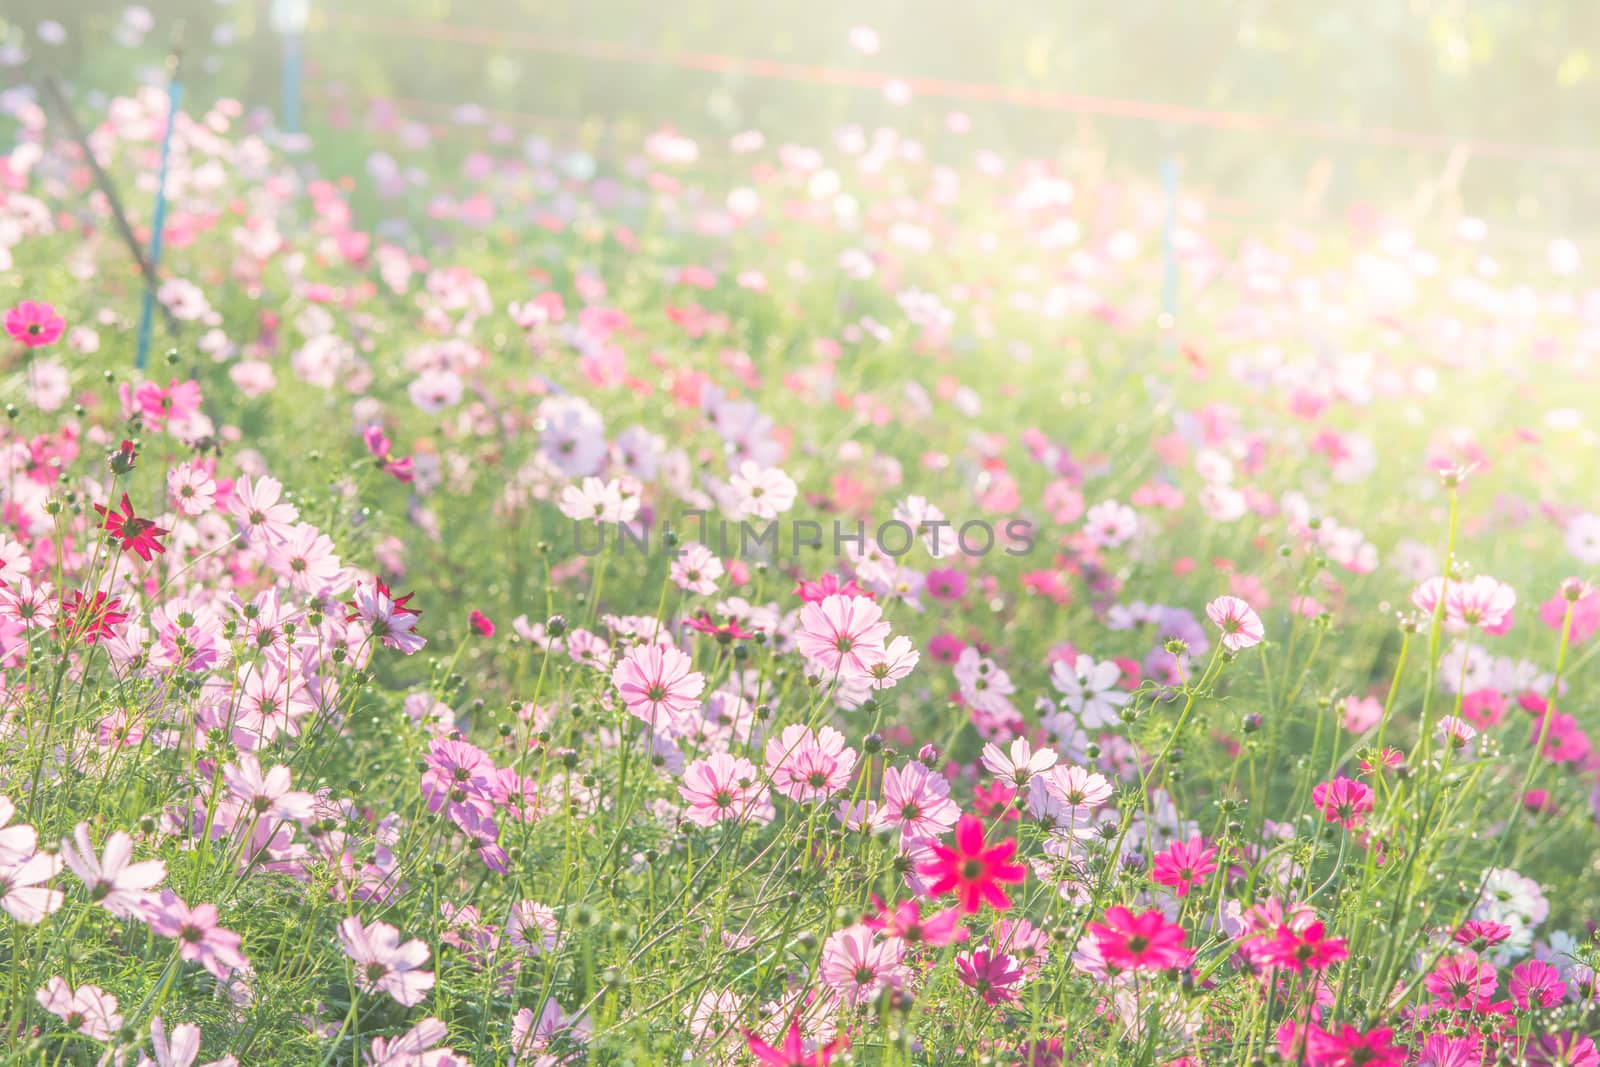 Soft, selective focus of Cosmos, blurry flower for background, c by yuiyuize